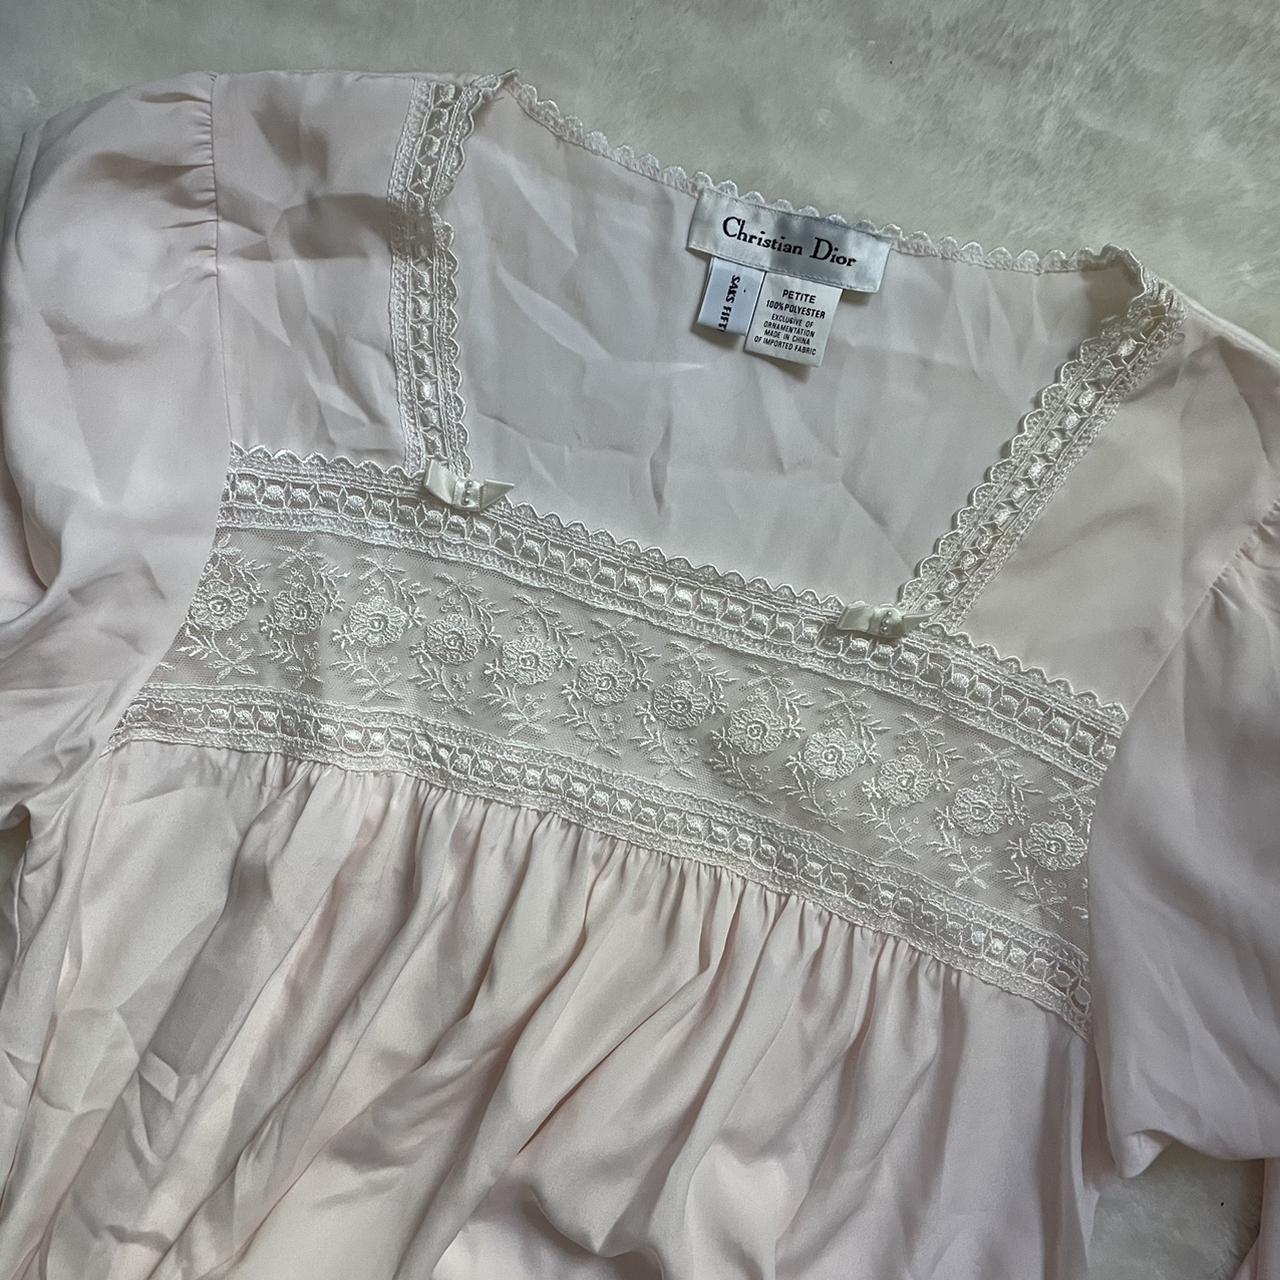 Christian Dior nightgown. Vintage 80s pale baby pink... - Depop